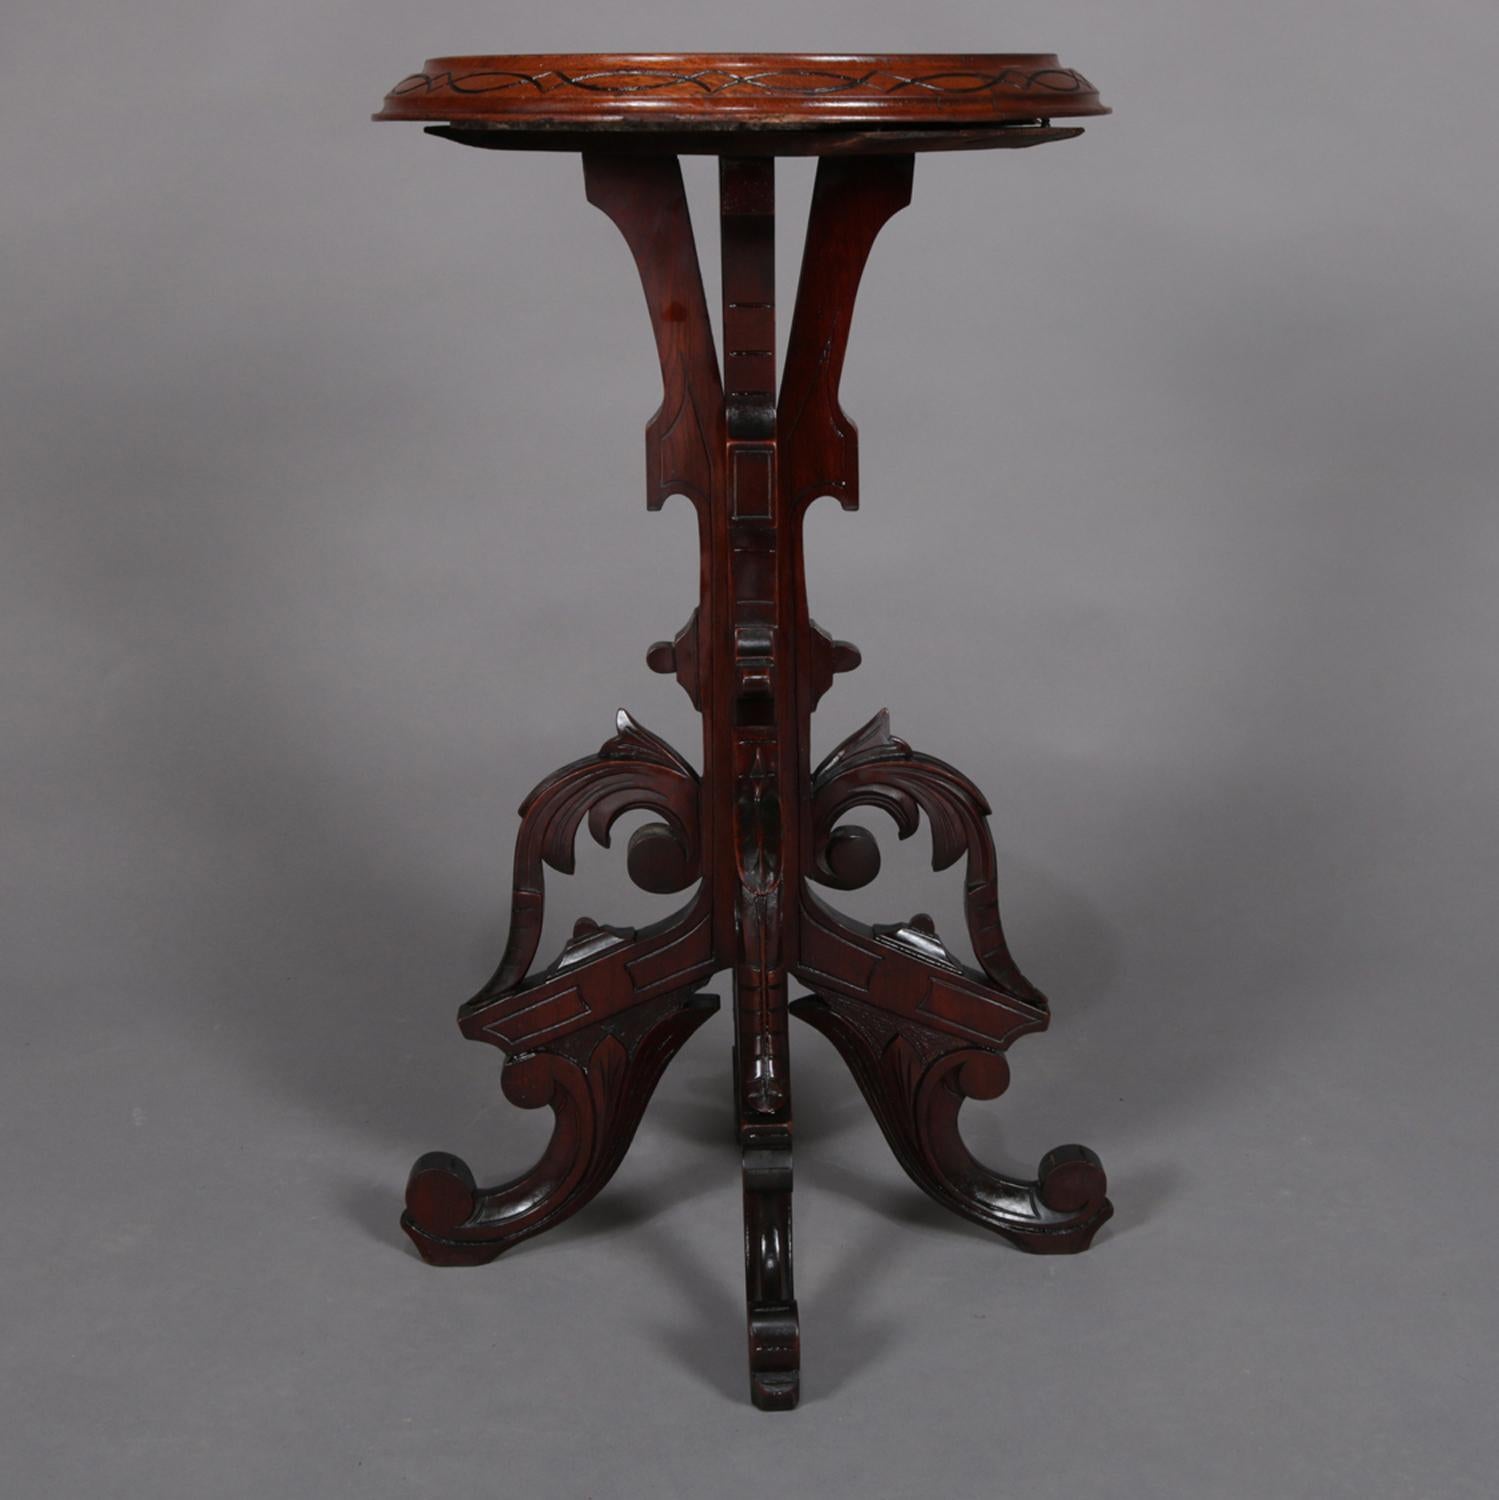 An antique Aesthetic Movement plant stand features marble top display having flared walnut frame with incised and ebonized repeating design surmounting carved acanthus and scroll form base, circa 1880

Measures: 29.5